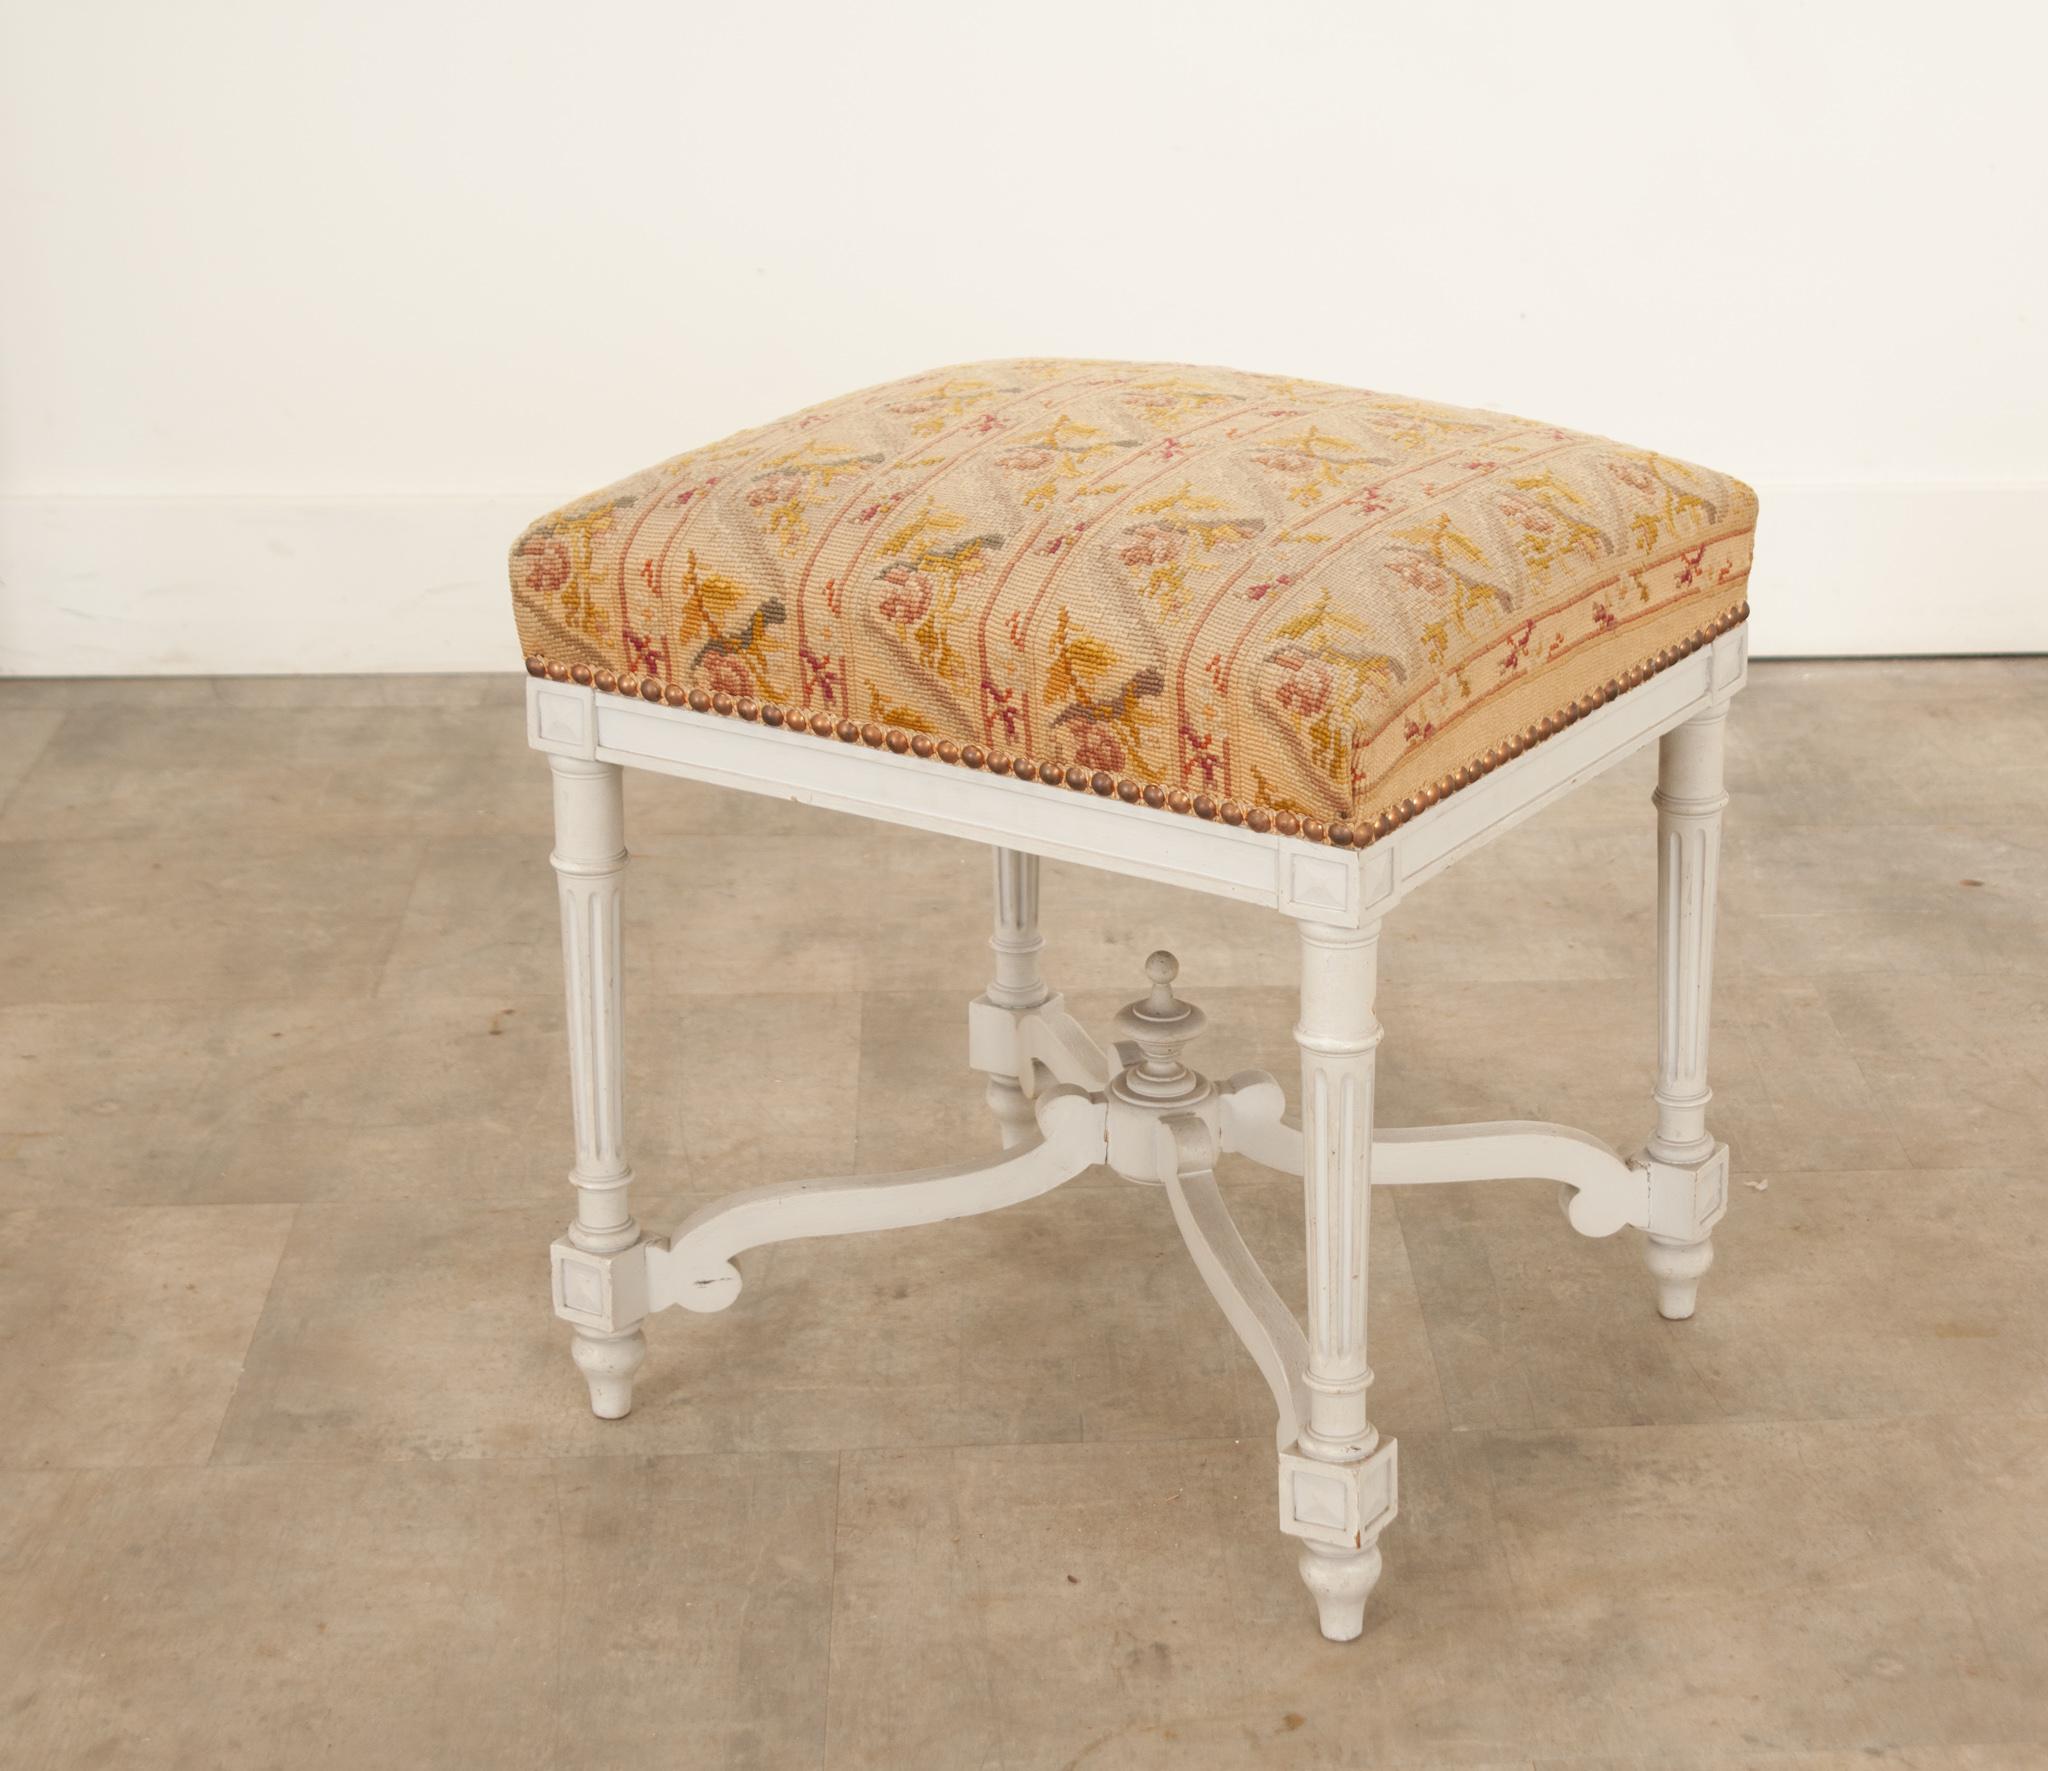 20th Century French 19th Century Needlepoint Square Stool For Sale